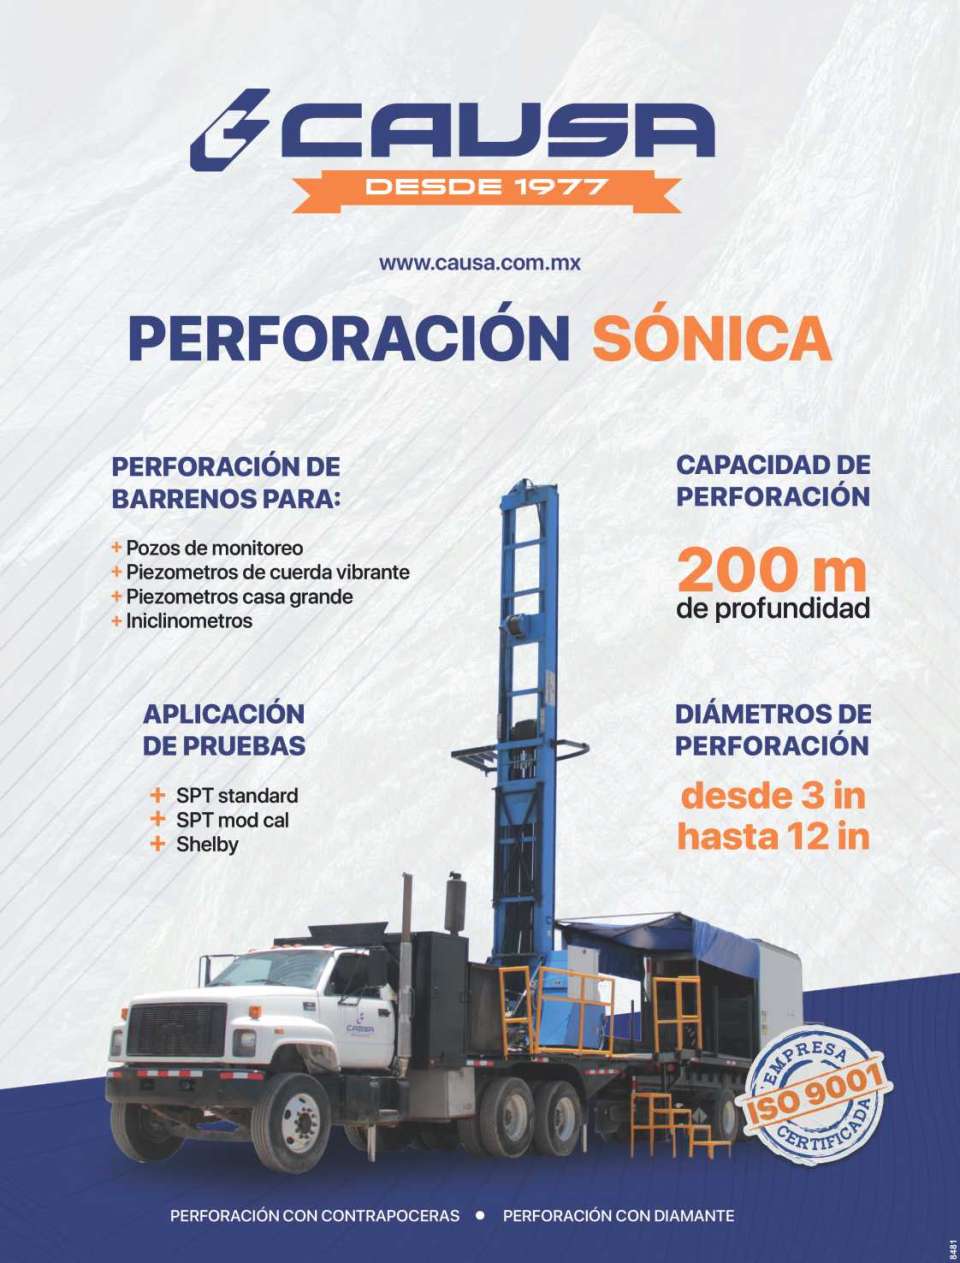 SONIC drilling. Drilling Capacity 200 m. deep, drilling diameters from 3 in. to 12 in. Drilling of Holes for Monitoring Wells, Piezometers and Iniclinometers.